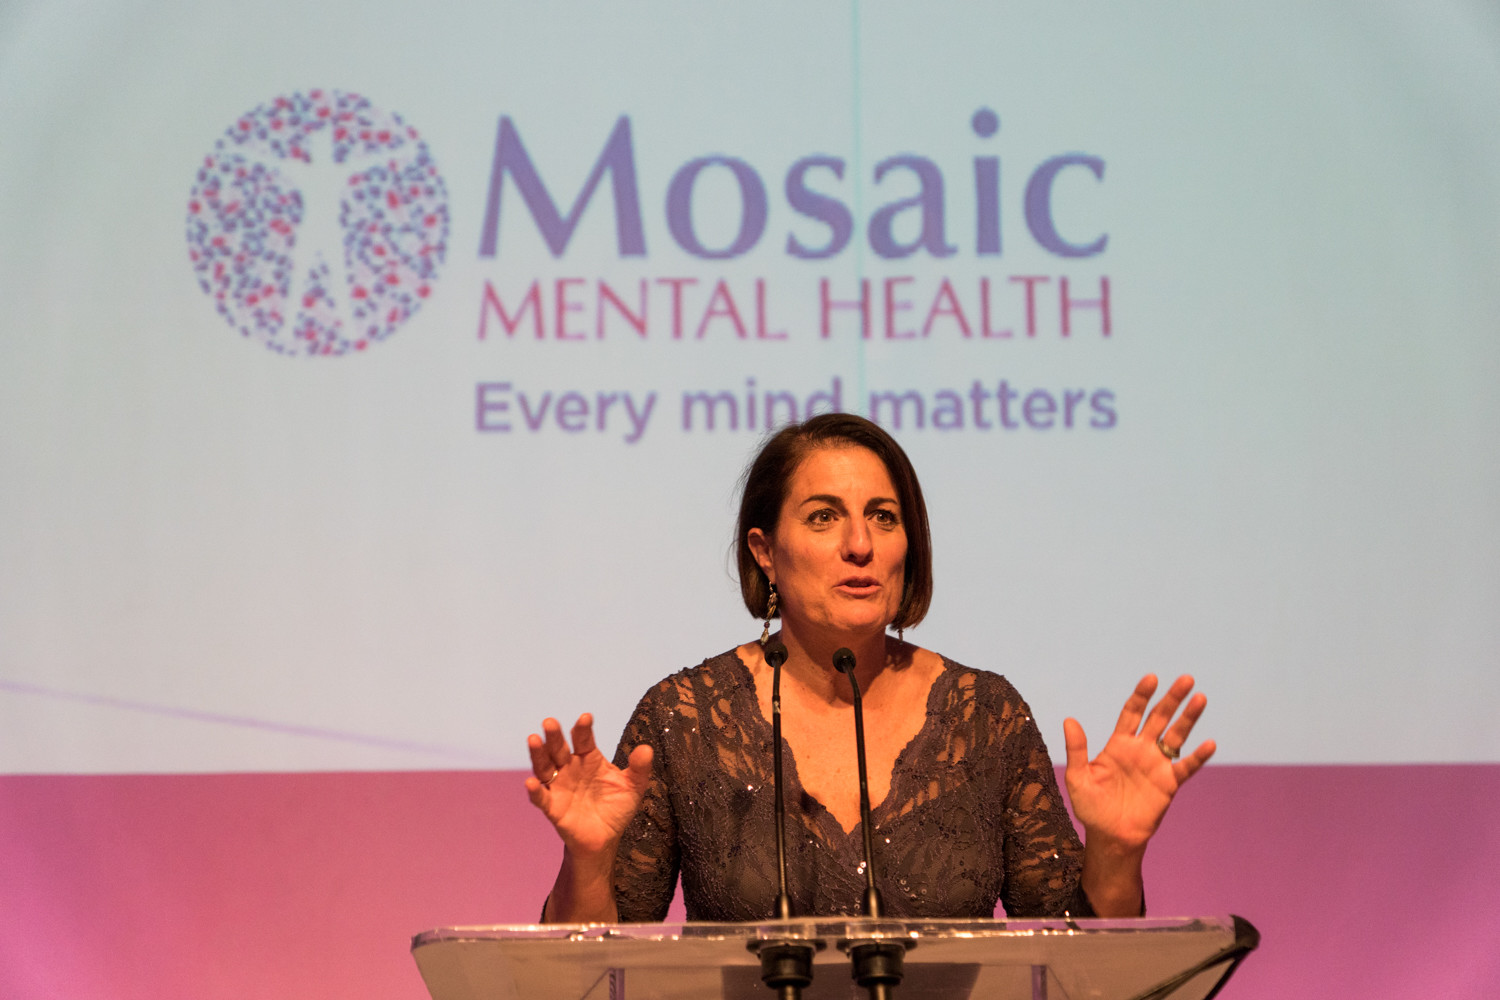 The gala held by Mosaic Mental Health, formerly known as Riverdale Mental Health Association, is part of its rebranding effort, according to Donna Demetri Friedman, Mosaic's executive director. The organization serves 1,000 patients annually.